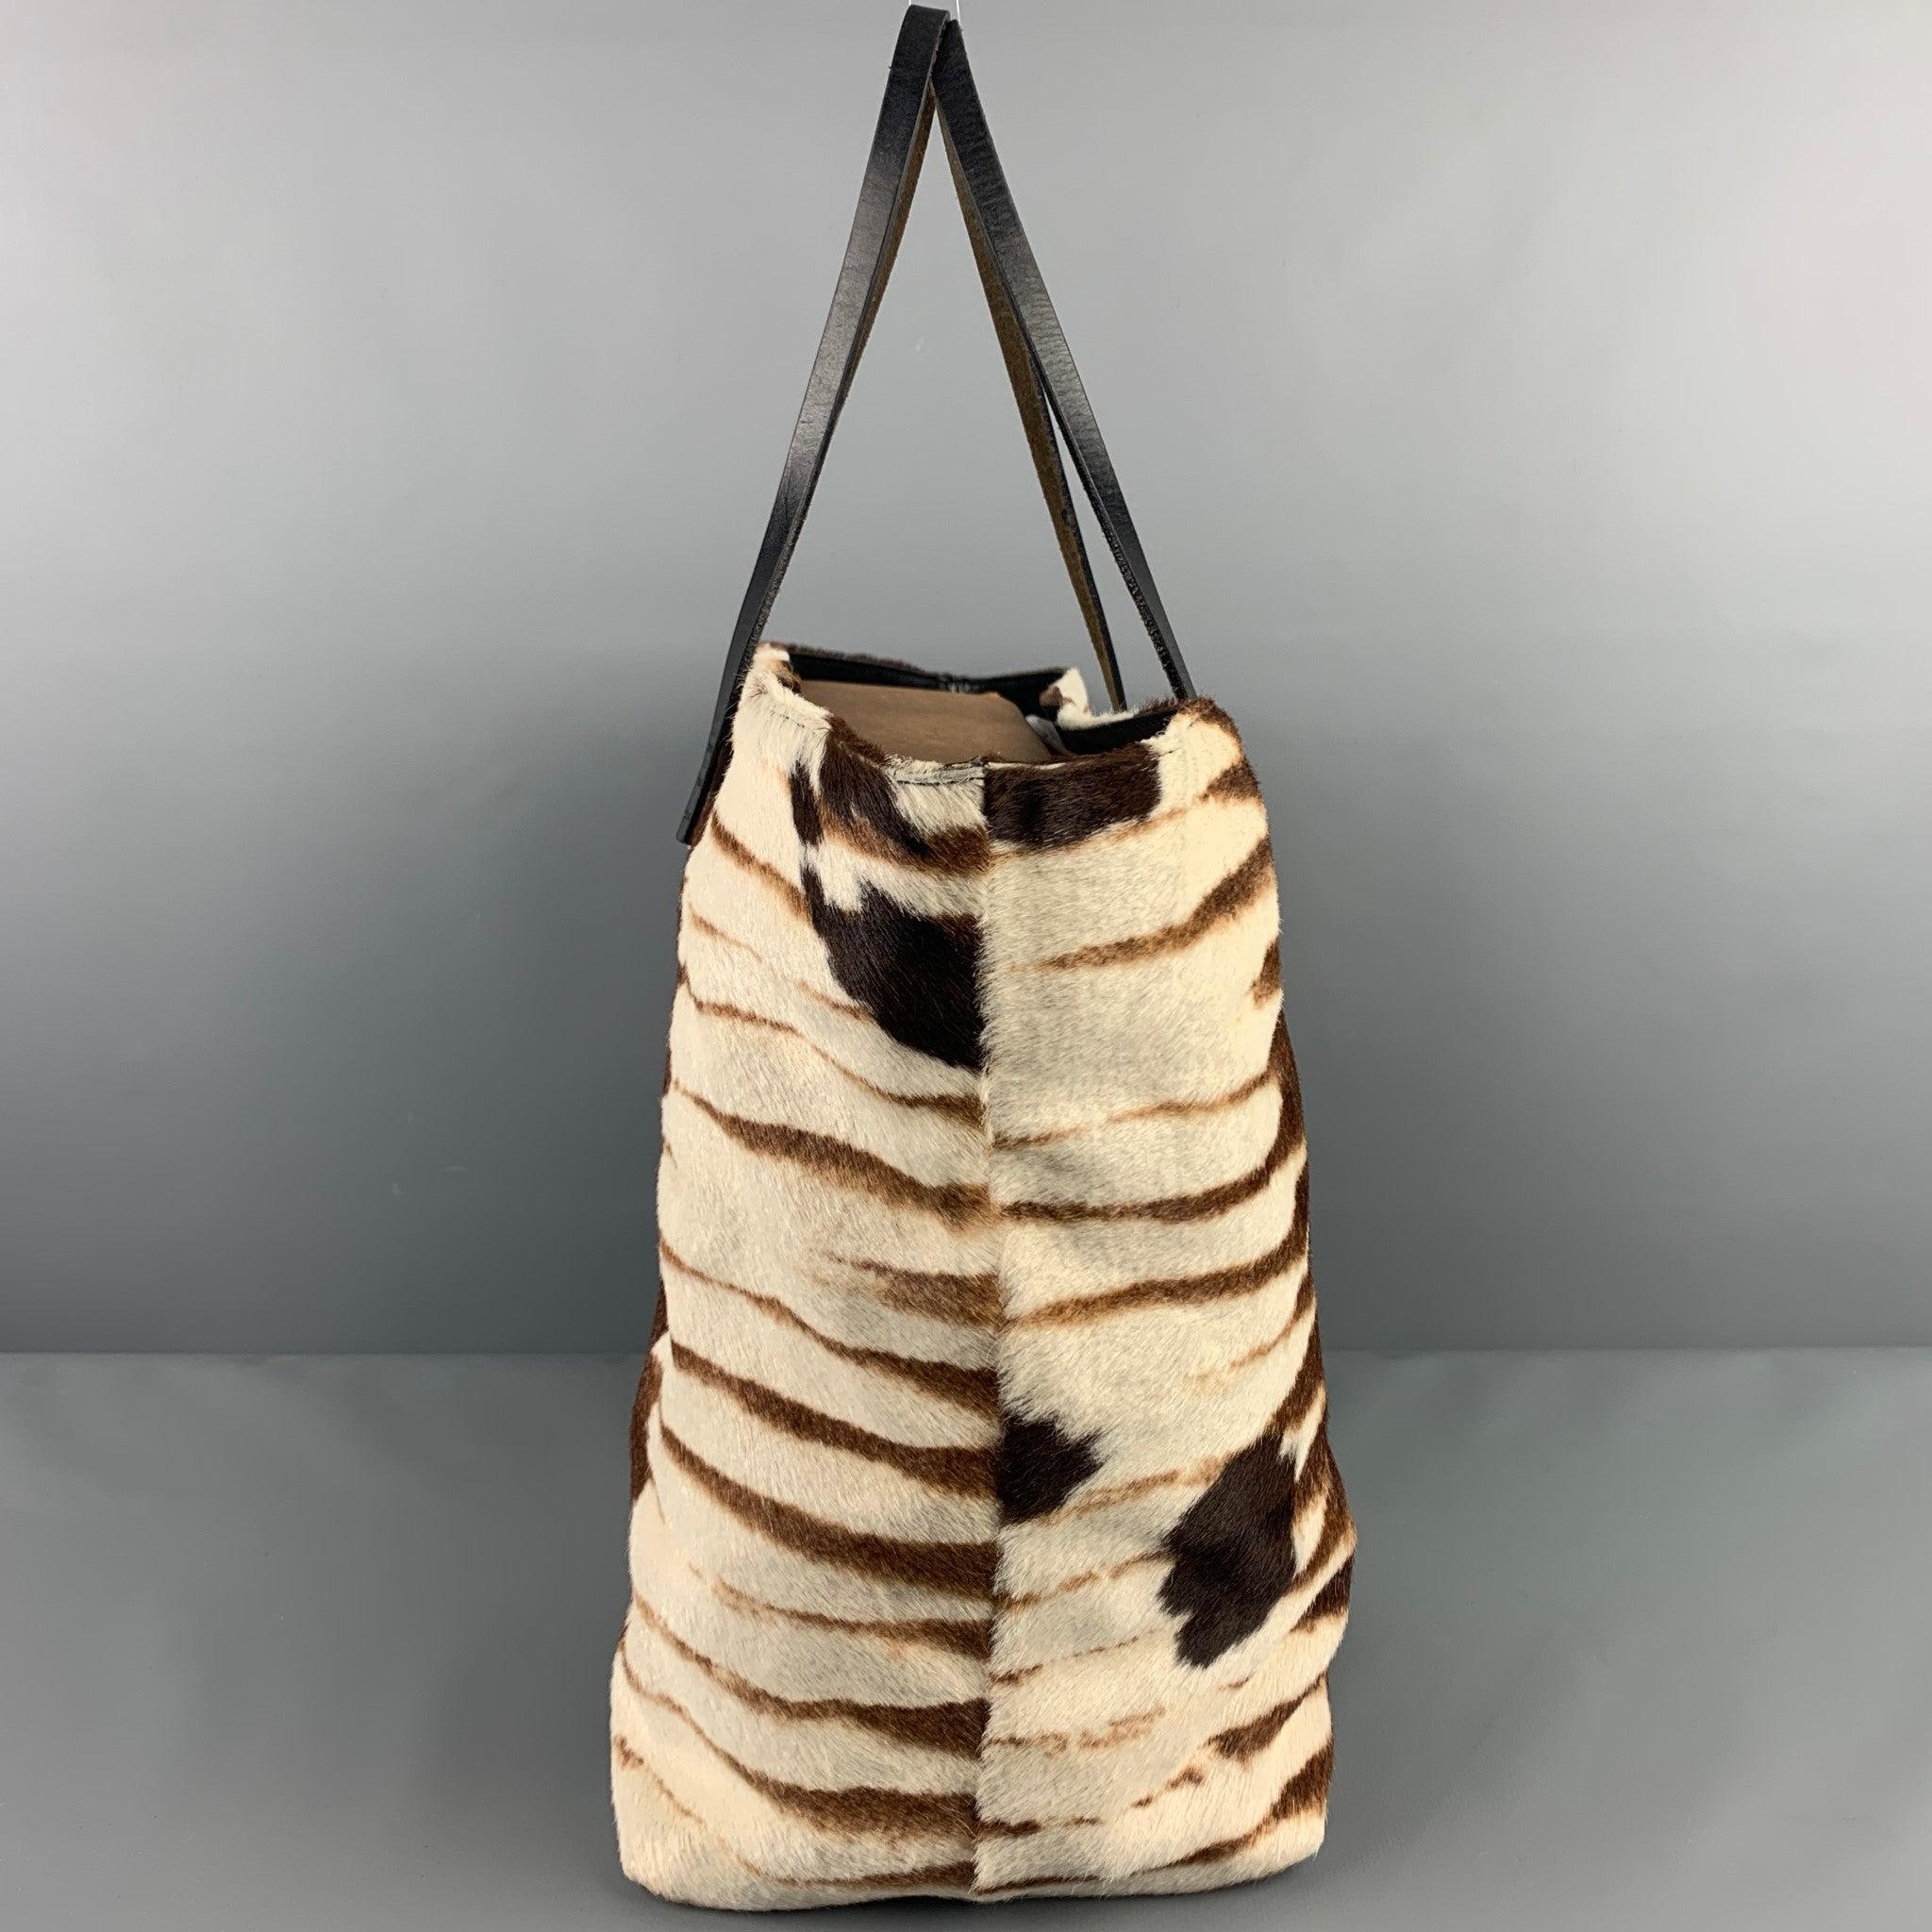 FENDI bag comes in a brown & cream zebra calf hair featuring leather top handles, inner pocket, and a snap button closure. Made in Italy.
Good
Pre-Owned Condition. Moderate discoloration at interior. As-Is.  

Measurements: 
  Length: 13.5 inches 